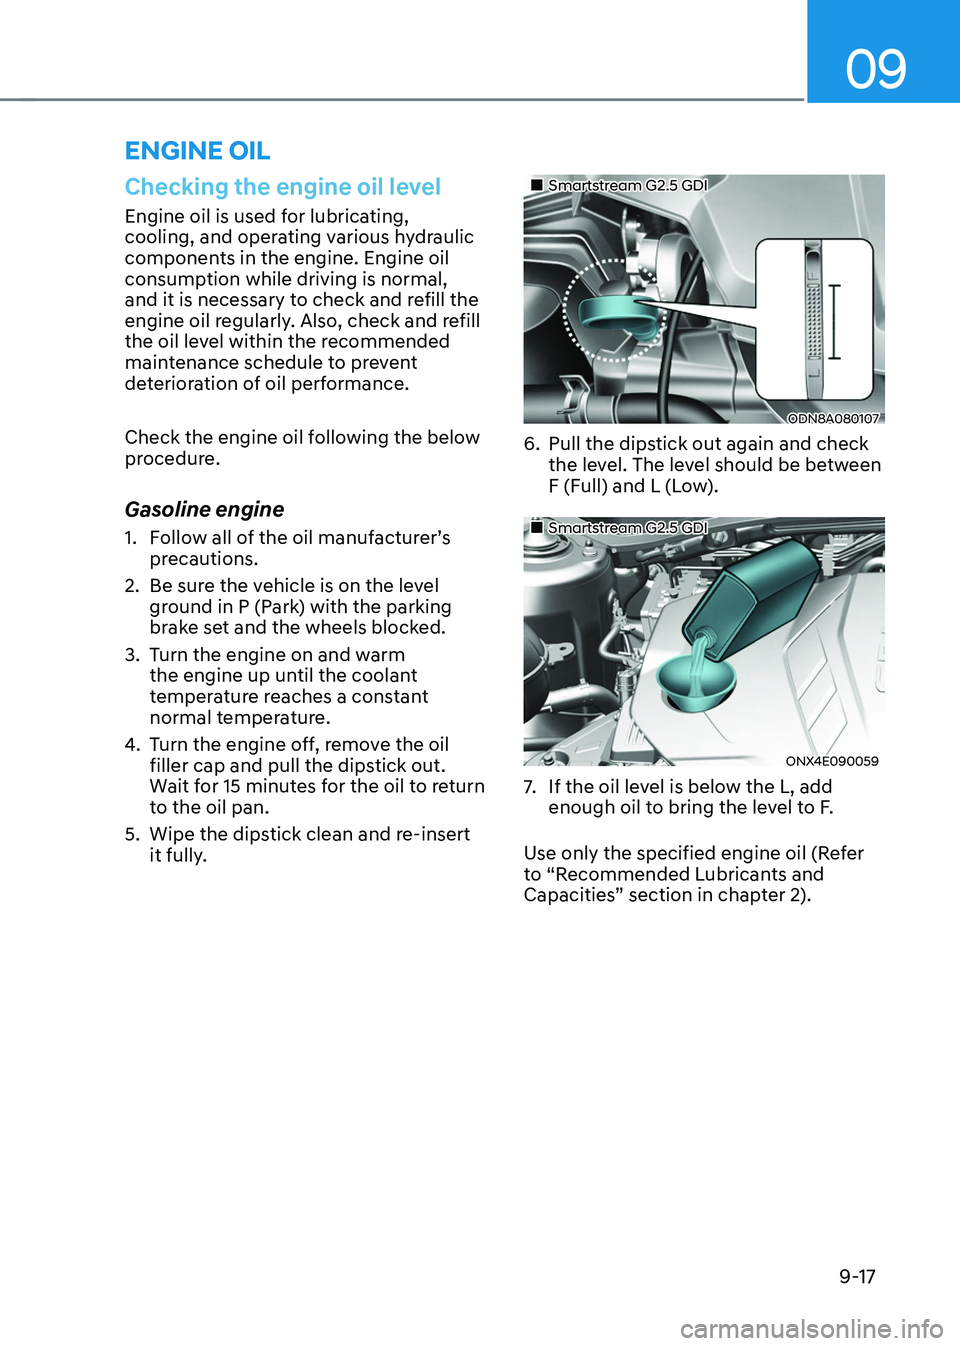 HYUNDAI TUCSON 2022 Owners Guide 09
9-17
ENGINE OIL
Checking the engine oil level
Engine oil is used for lubricating, 
cooling, and operating various hydraulic 
components in the engine. Engine oil 
consumption while driving is norma